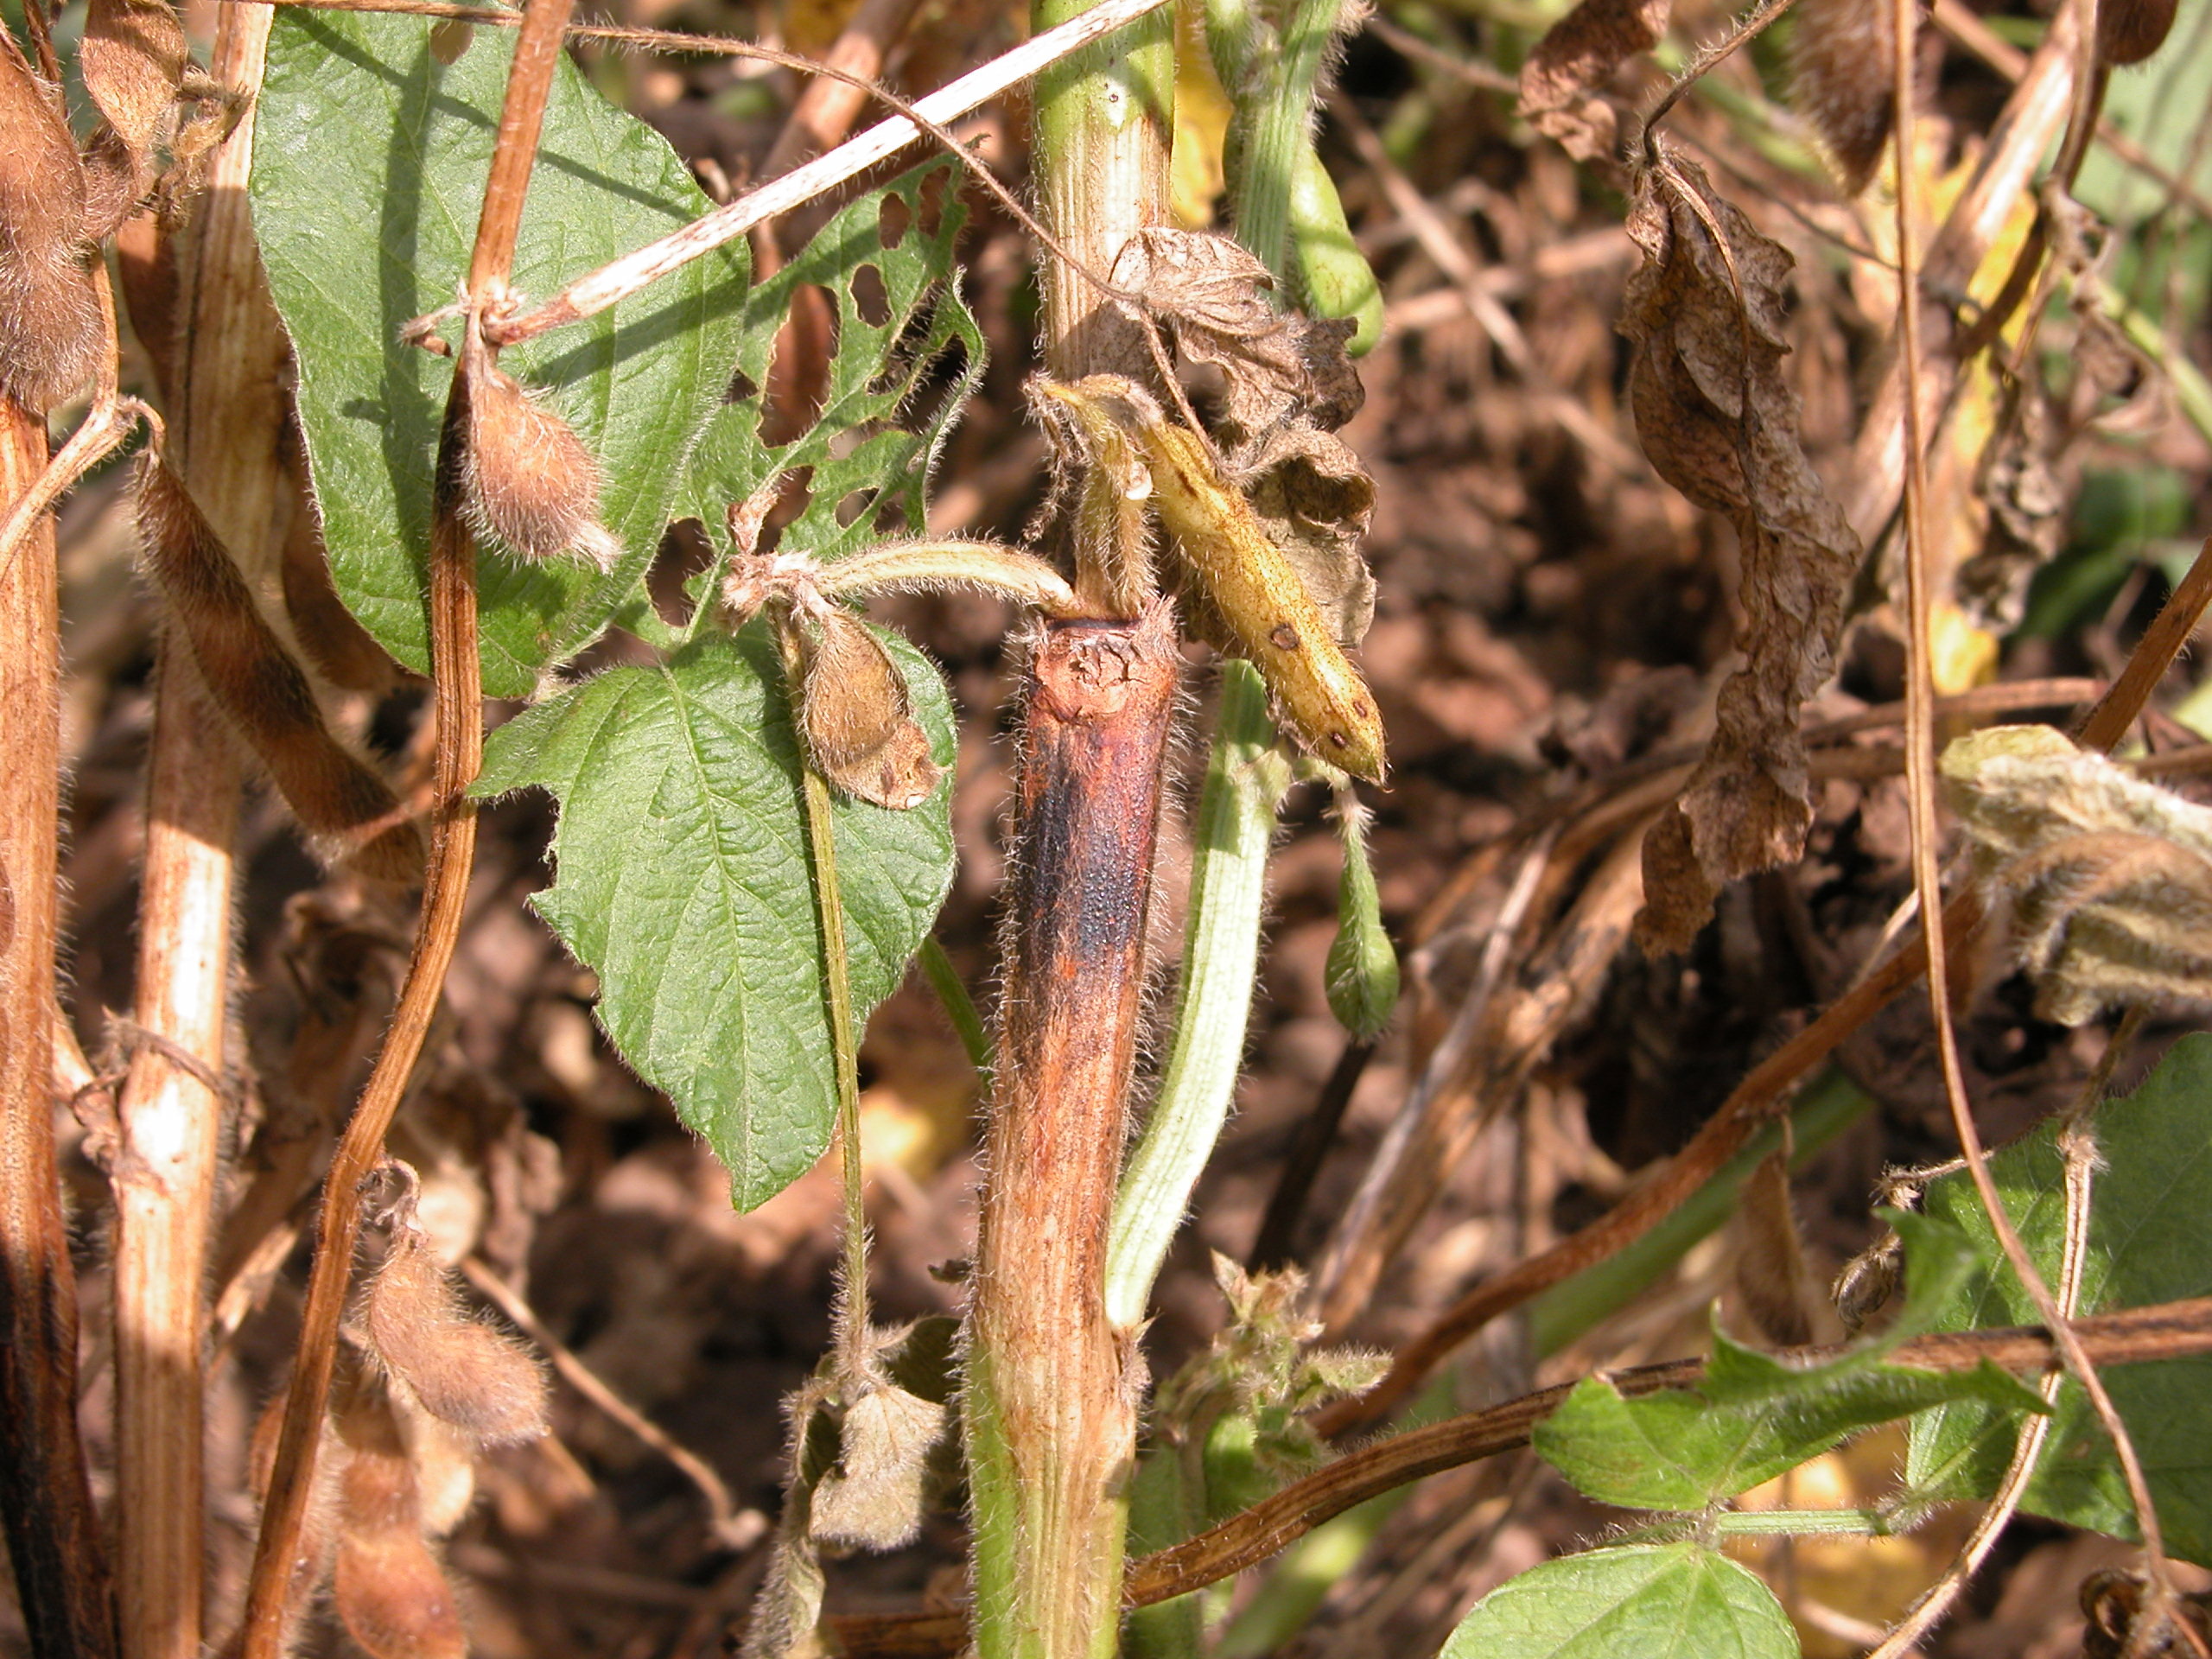 Characteristic stem canker lesion on soybean stem.